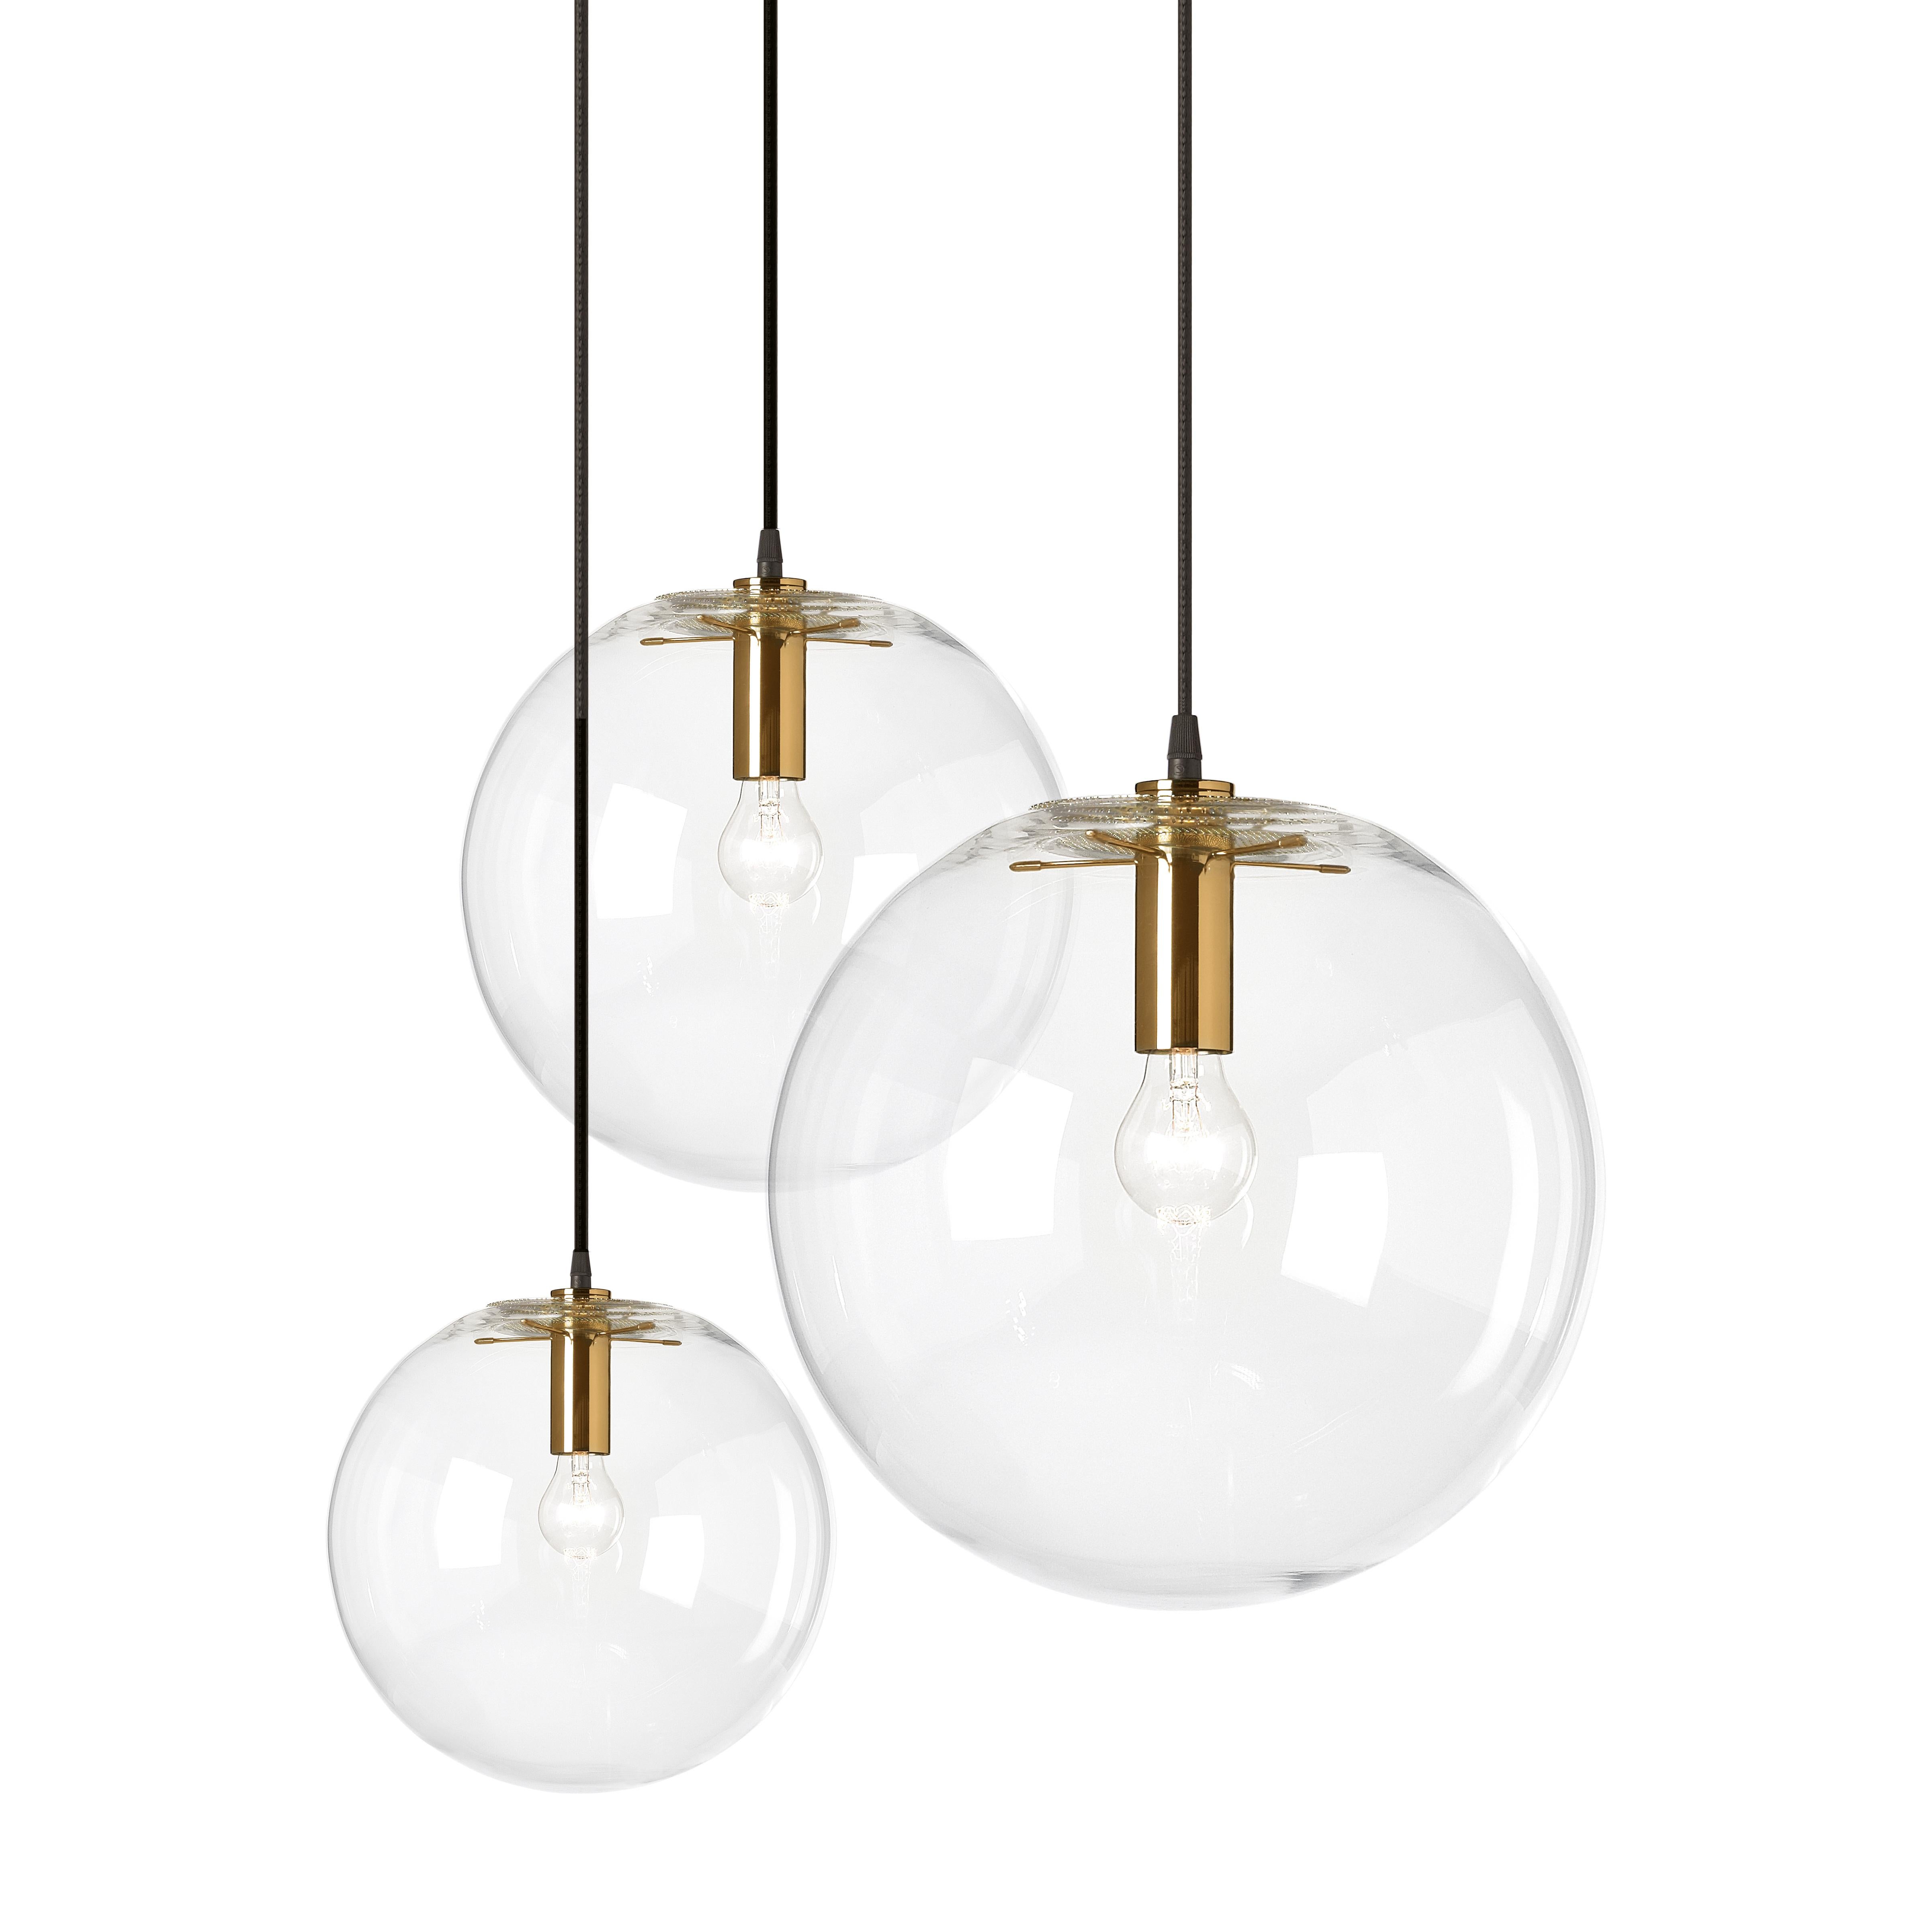 Hand-blown clear crystal glass sphere. Centrally suspended by a five-armed light head. Insect protection cover and light head in metal, brass-plated. Black fabric covered wire.

UL version 110 V:
Max. 60 W / 110 V
Socket E 26

Dimensions: W 25